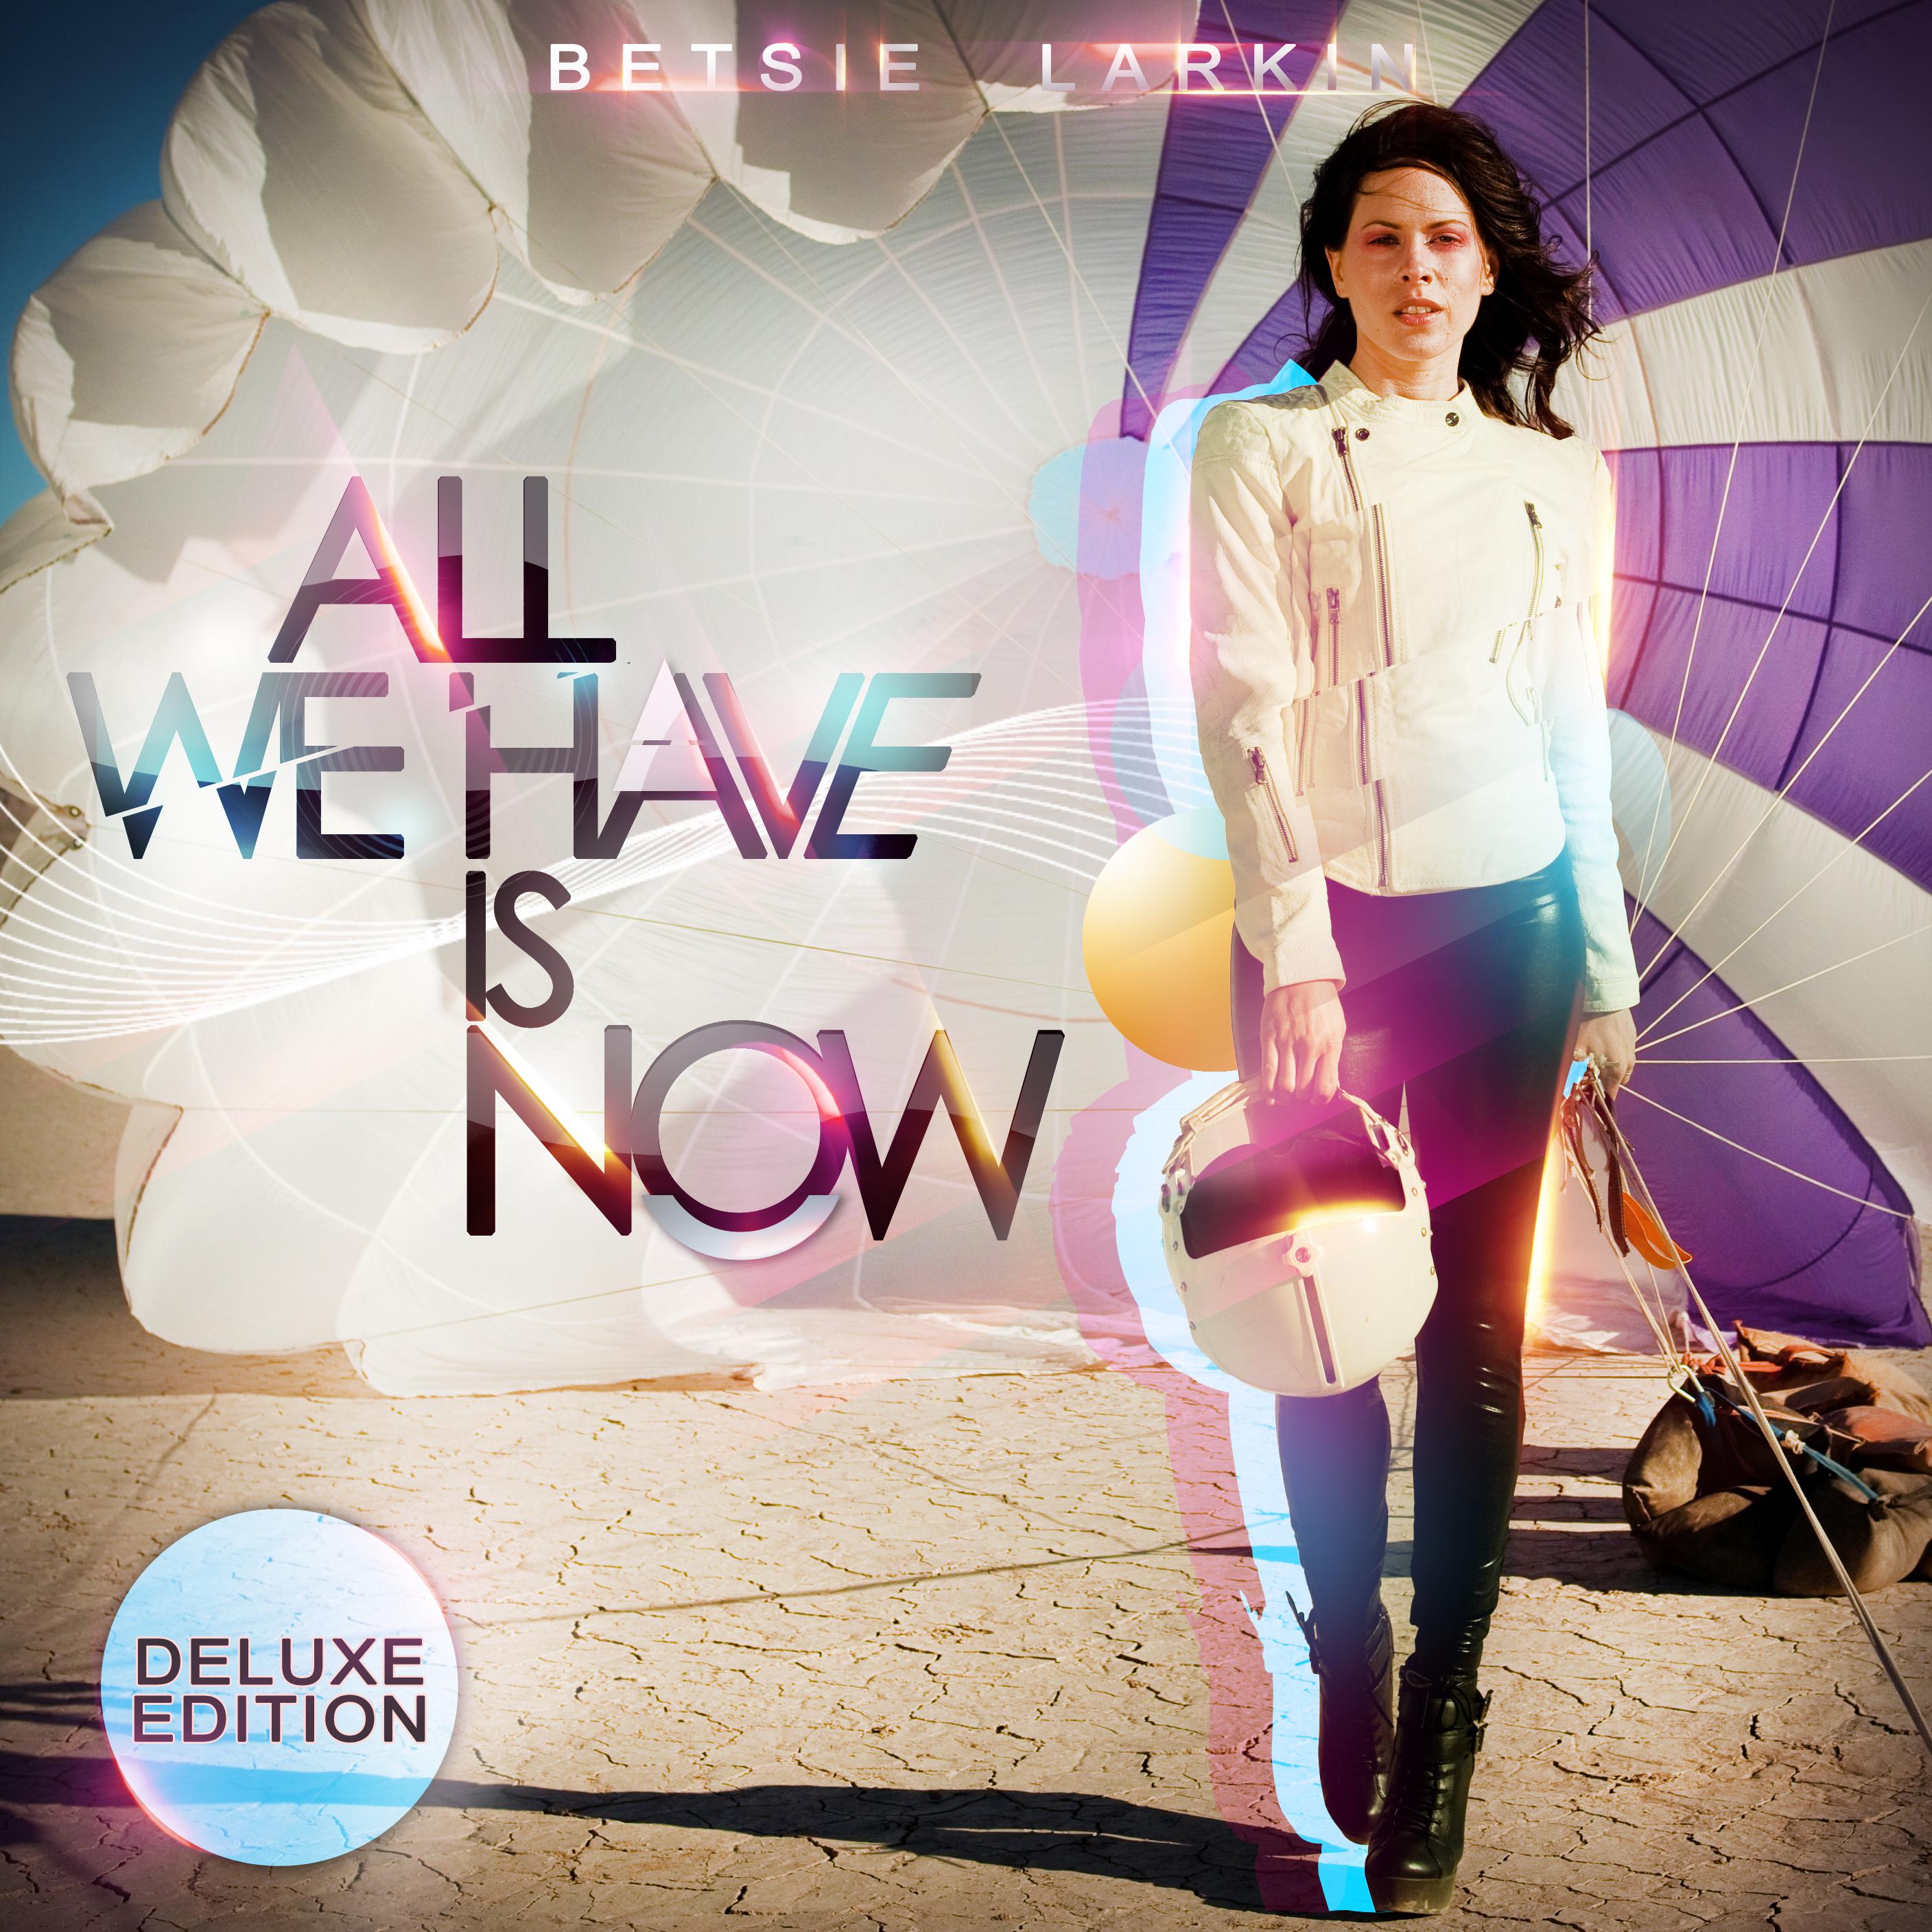 All We Have Is Now (Deluxe Edition)